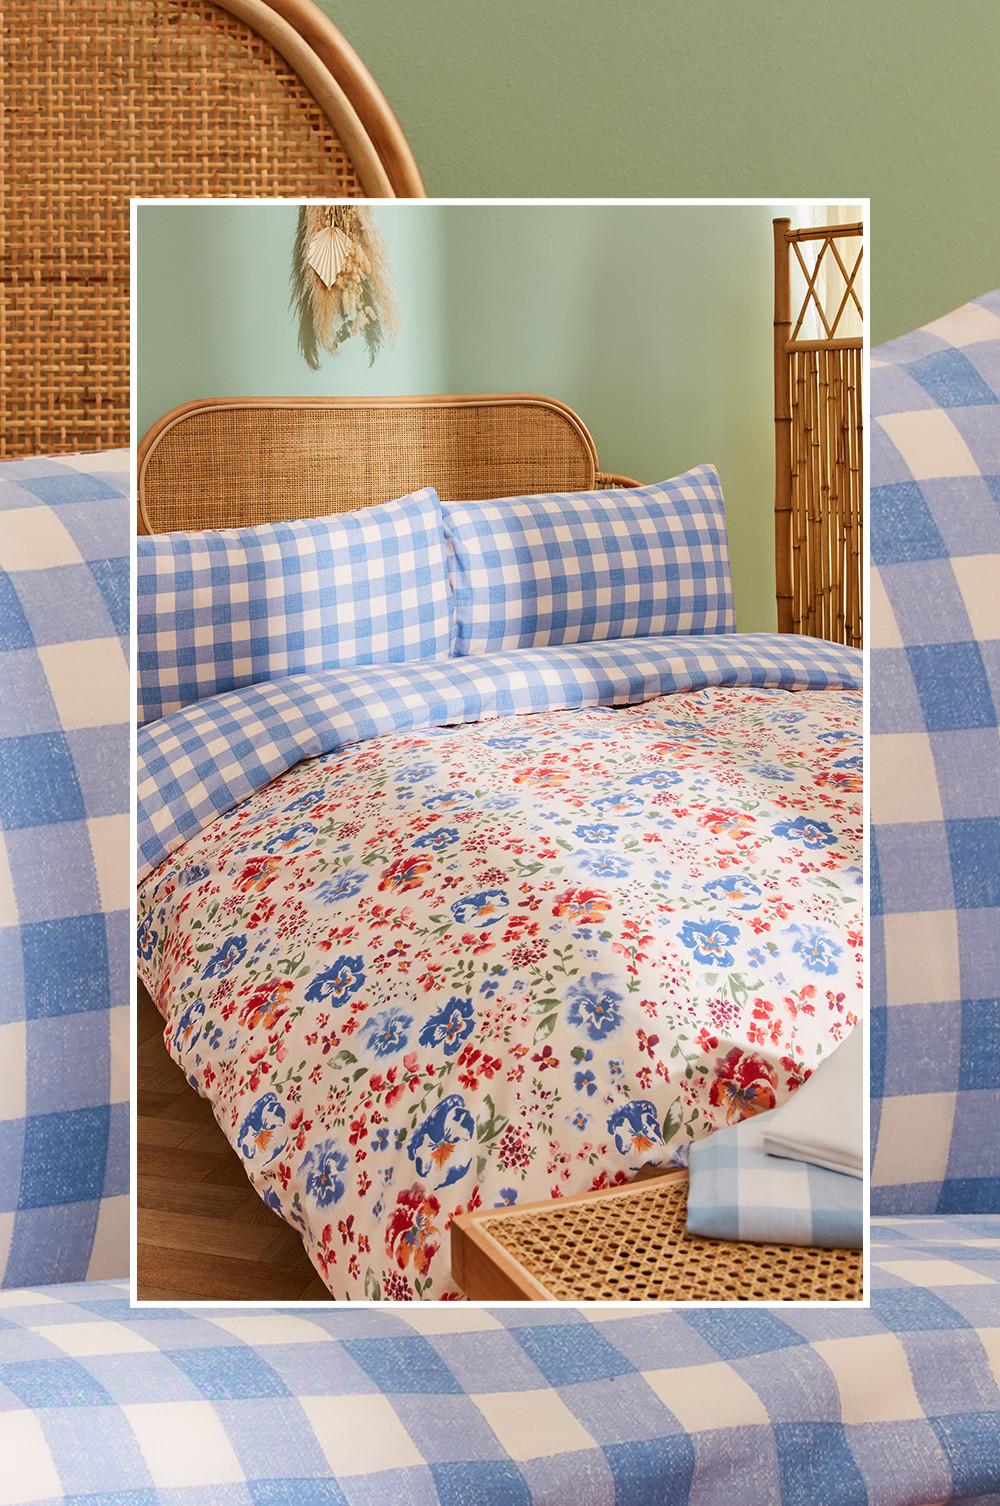 Bedroom set up with blue and white gingham bedsheets